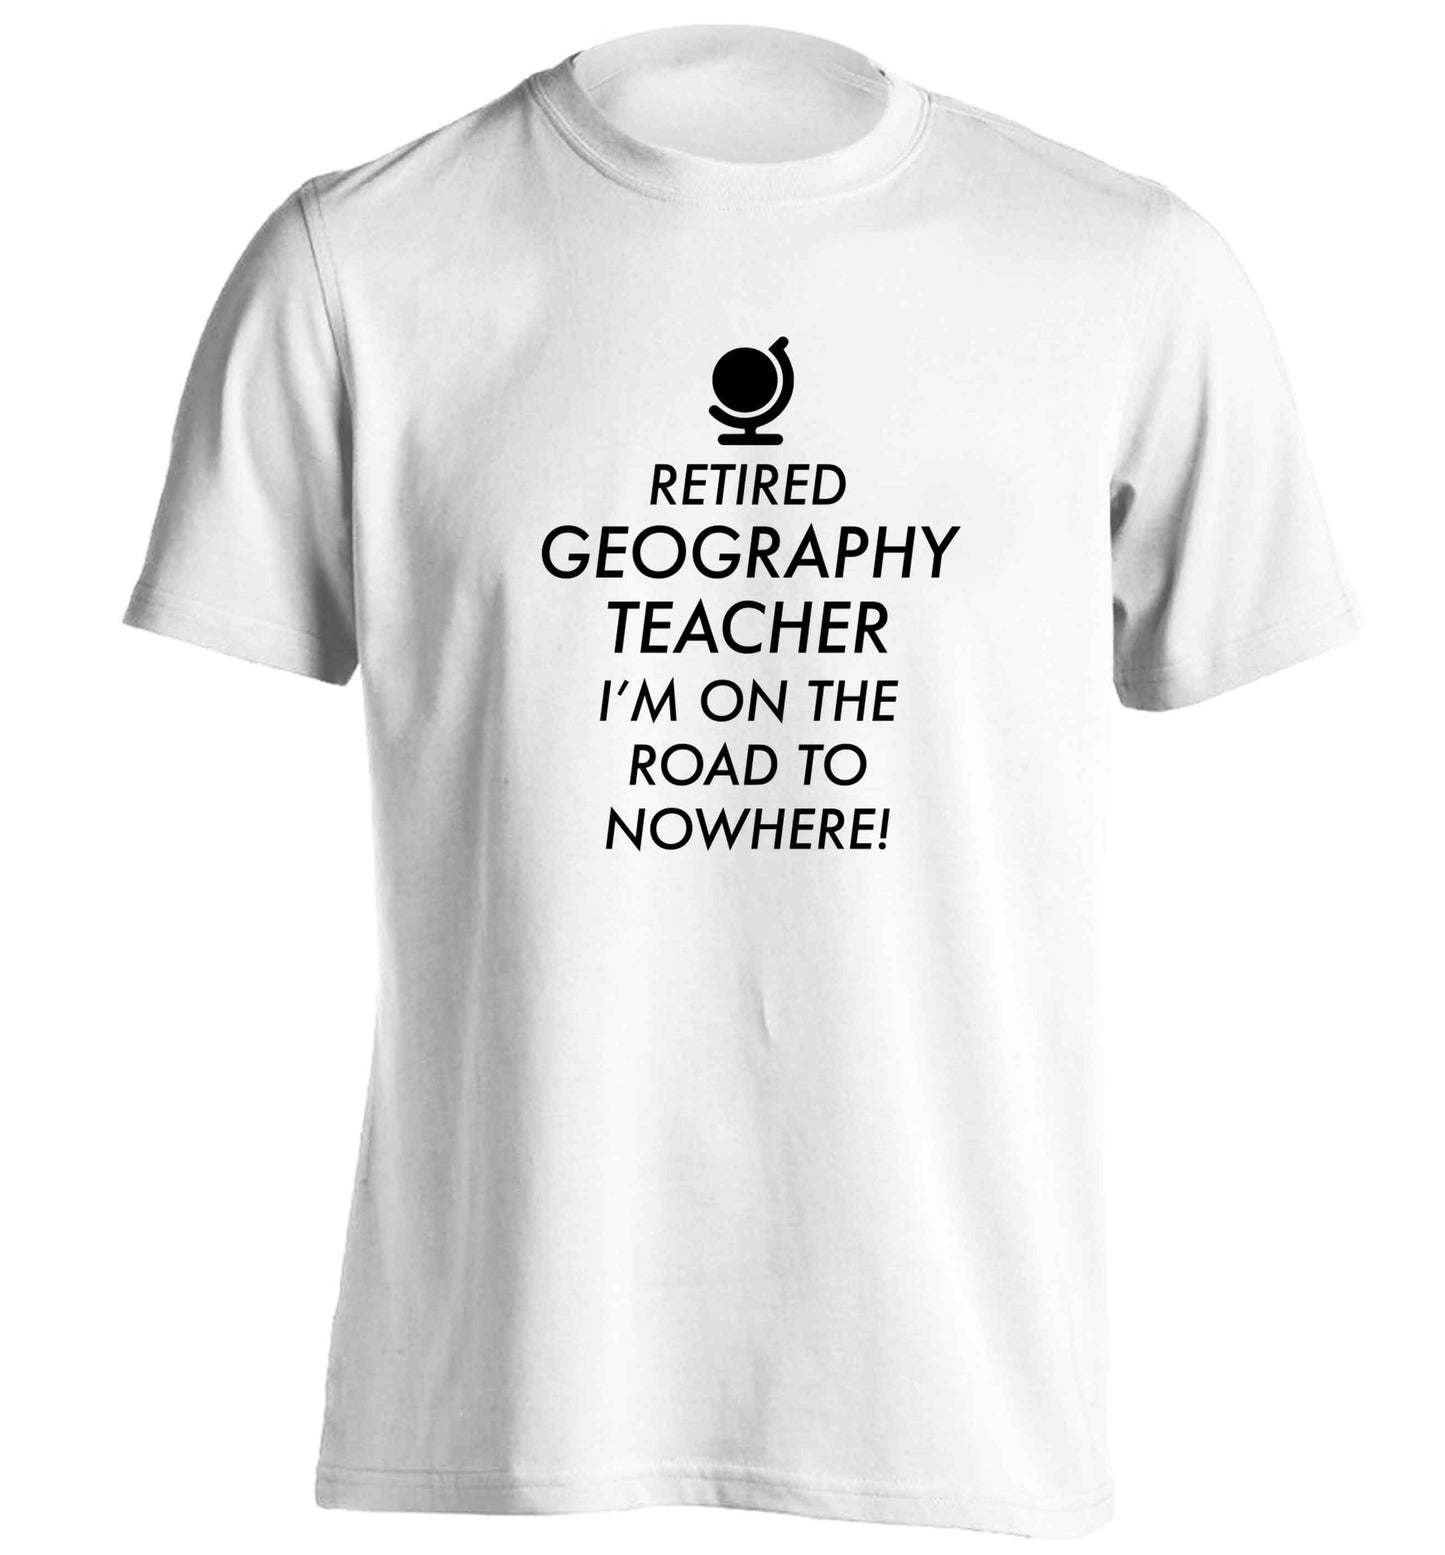 Retired geography teacher I'm on the road to nowhere adults unisex white Tshirt 2XL